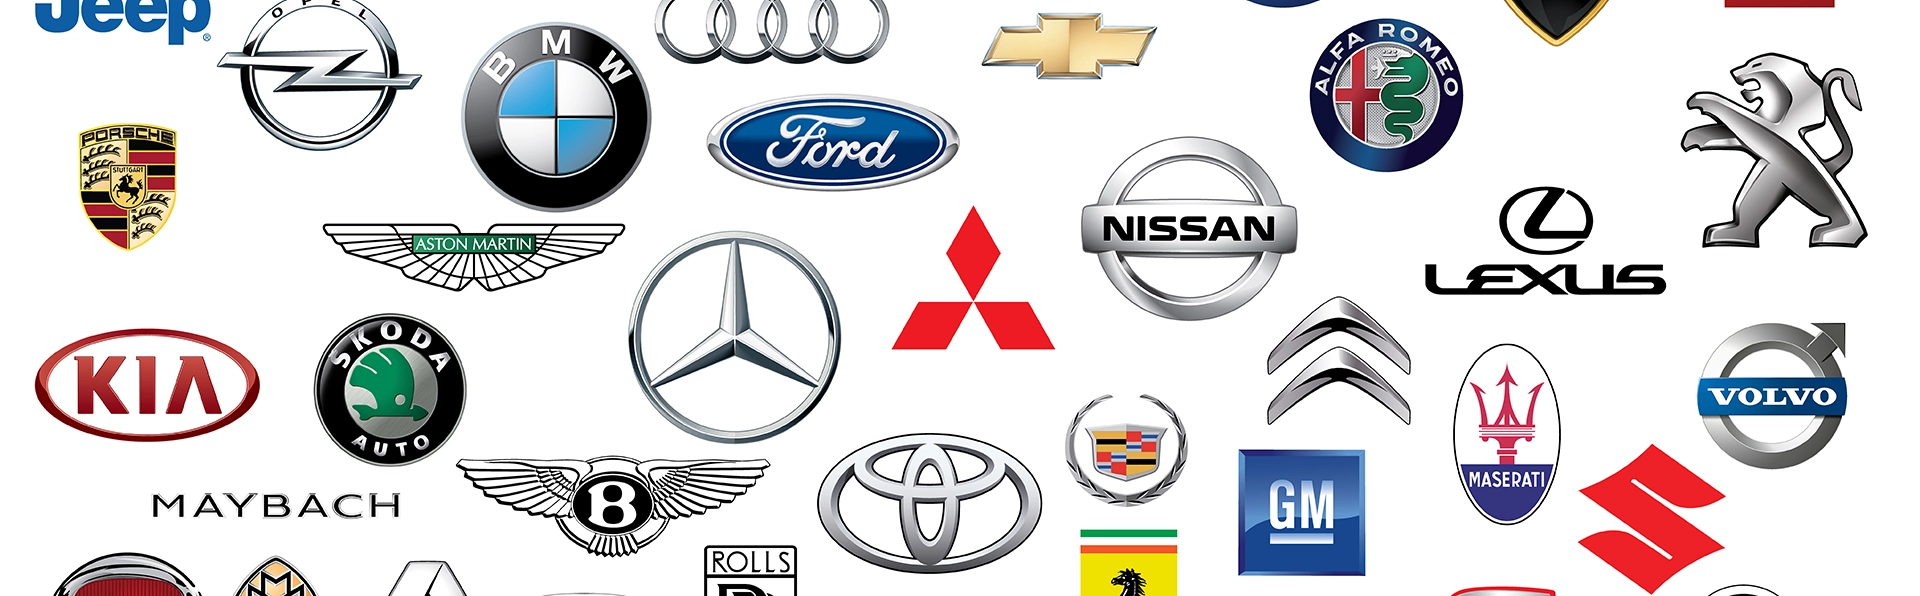 The Top Five Most Popular Car Brands - Perfect for Leasing